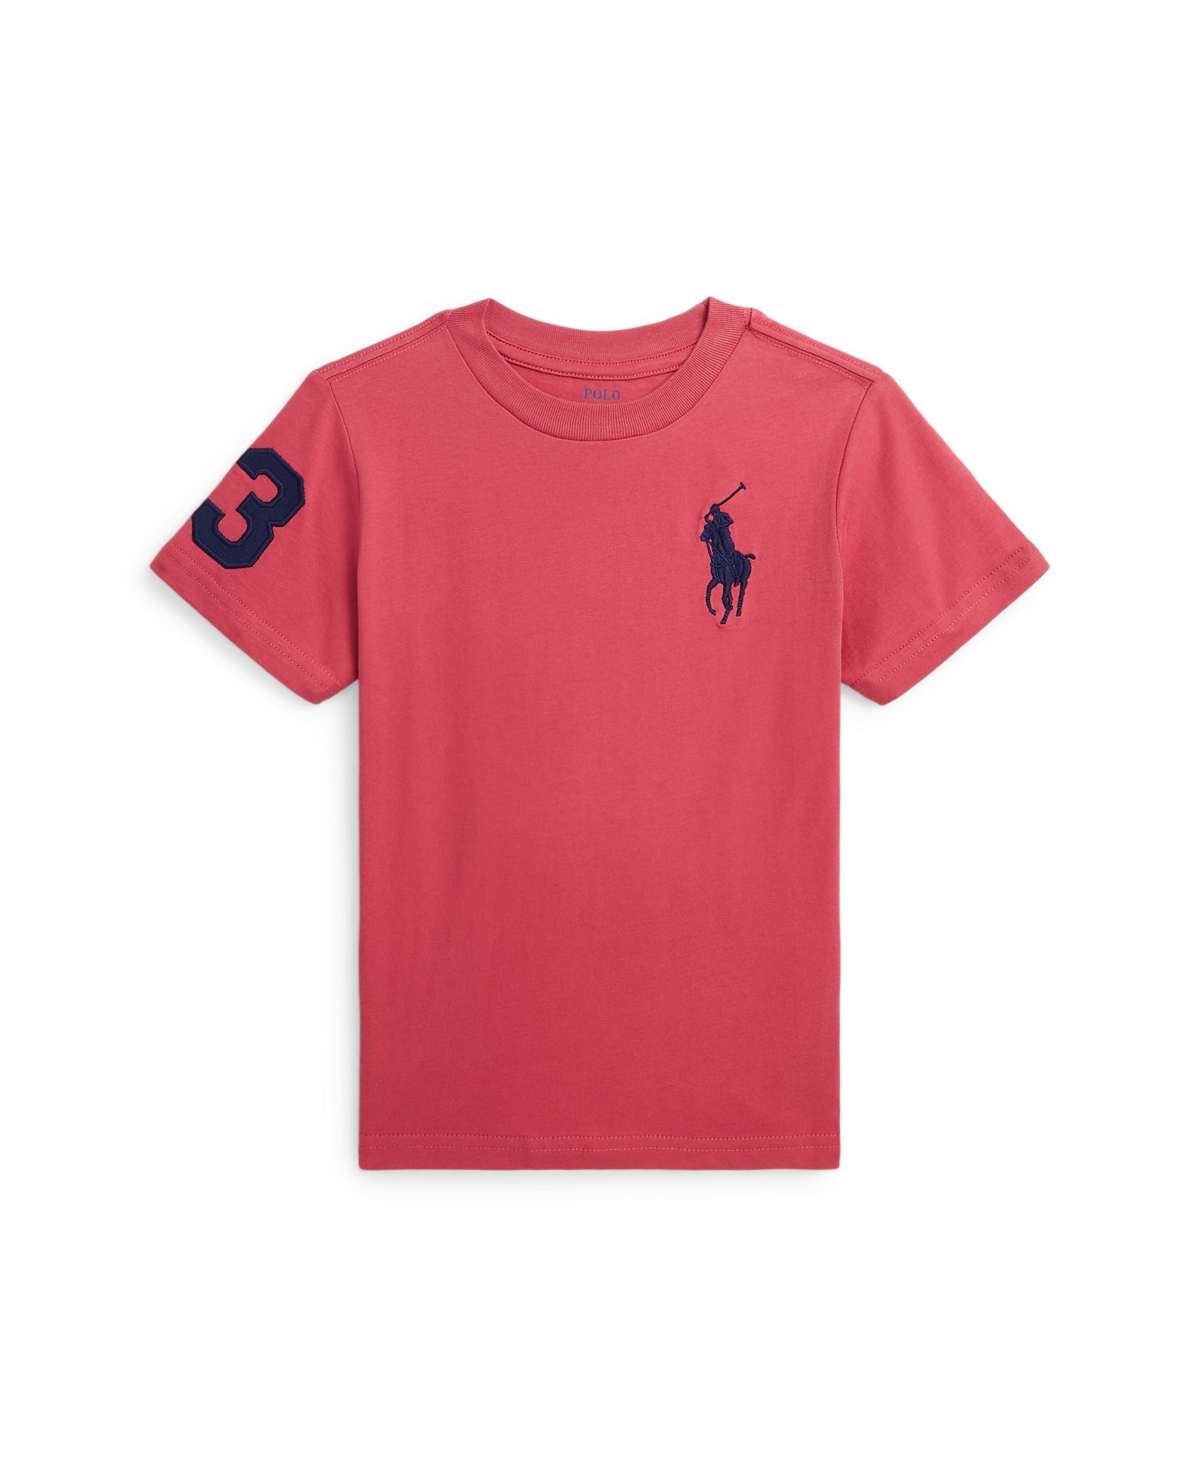 Polo Ralph Lauren Kids' Toddler And Little Boys Big Pony Cotton Jersey T-shirt In Nantucket Red